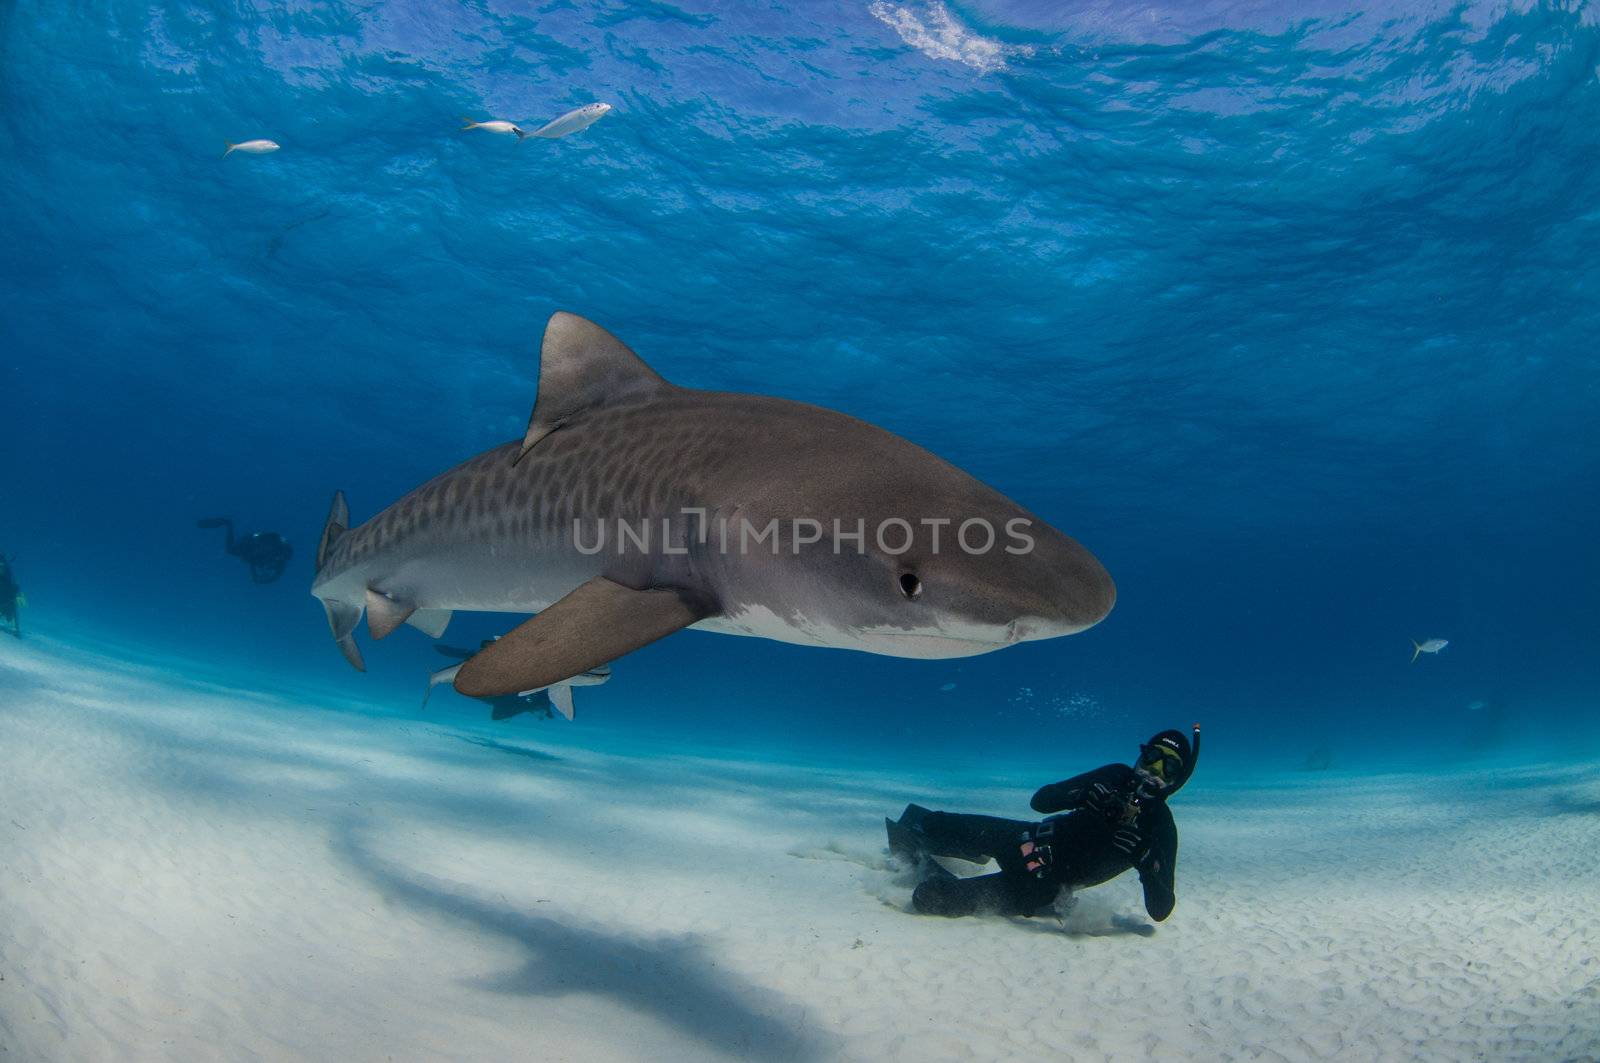 Free-diving with Tiger sharks is sublime, the diver getting a chance to interact freely without the noise of bubbles, with the sharks as calm as ever